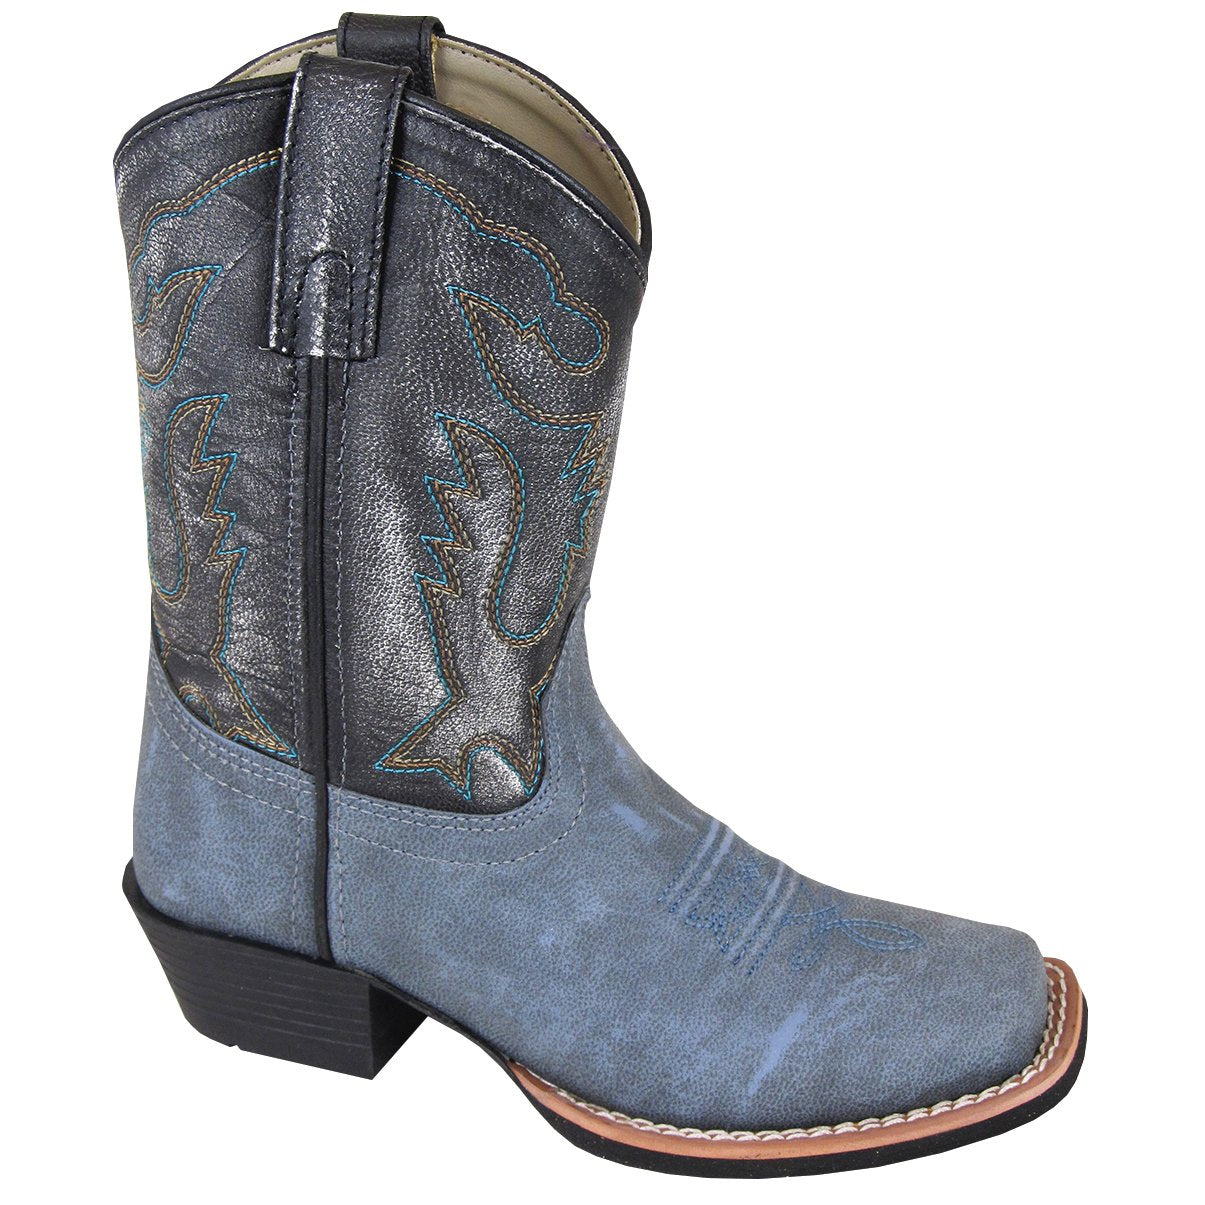 Smoky Mountain Youth Gallup Vintage Blue/Black Cowboy Boot